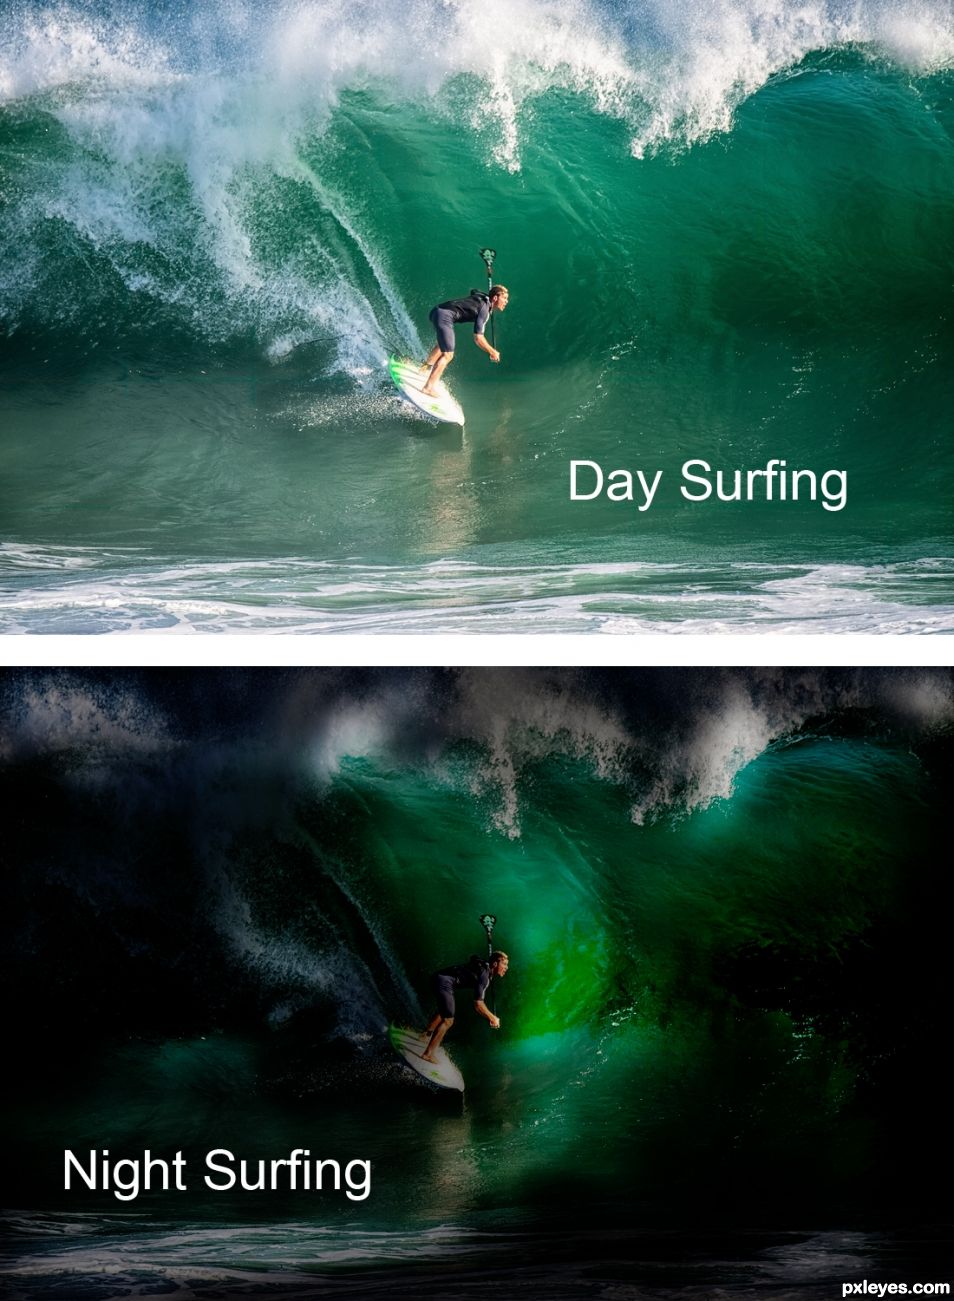 From day to night surfing